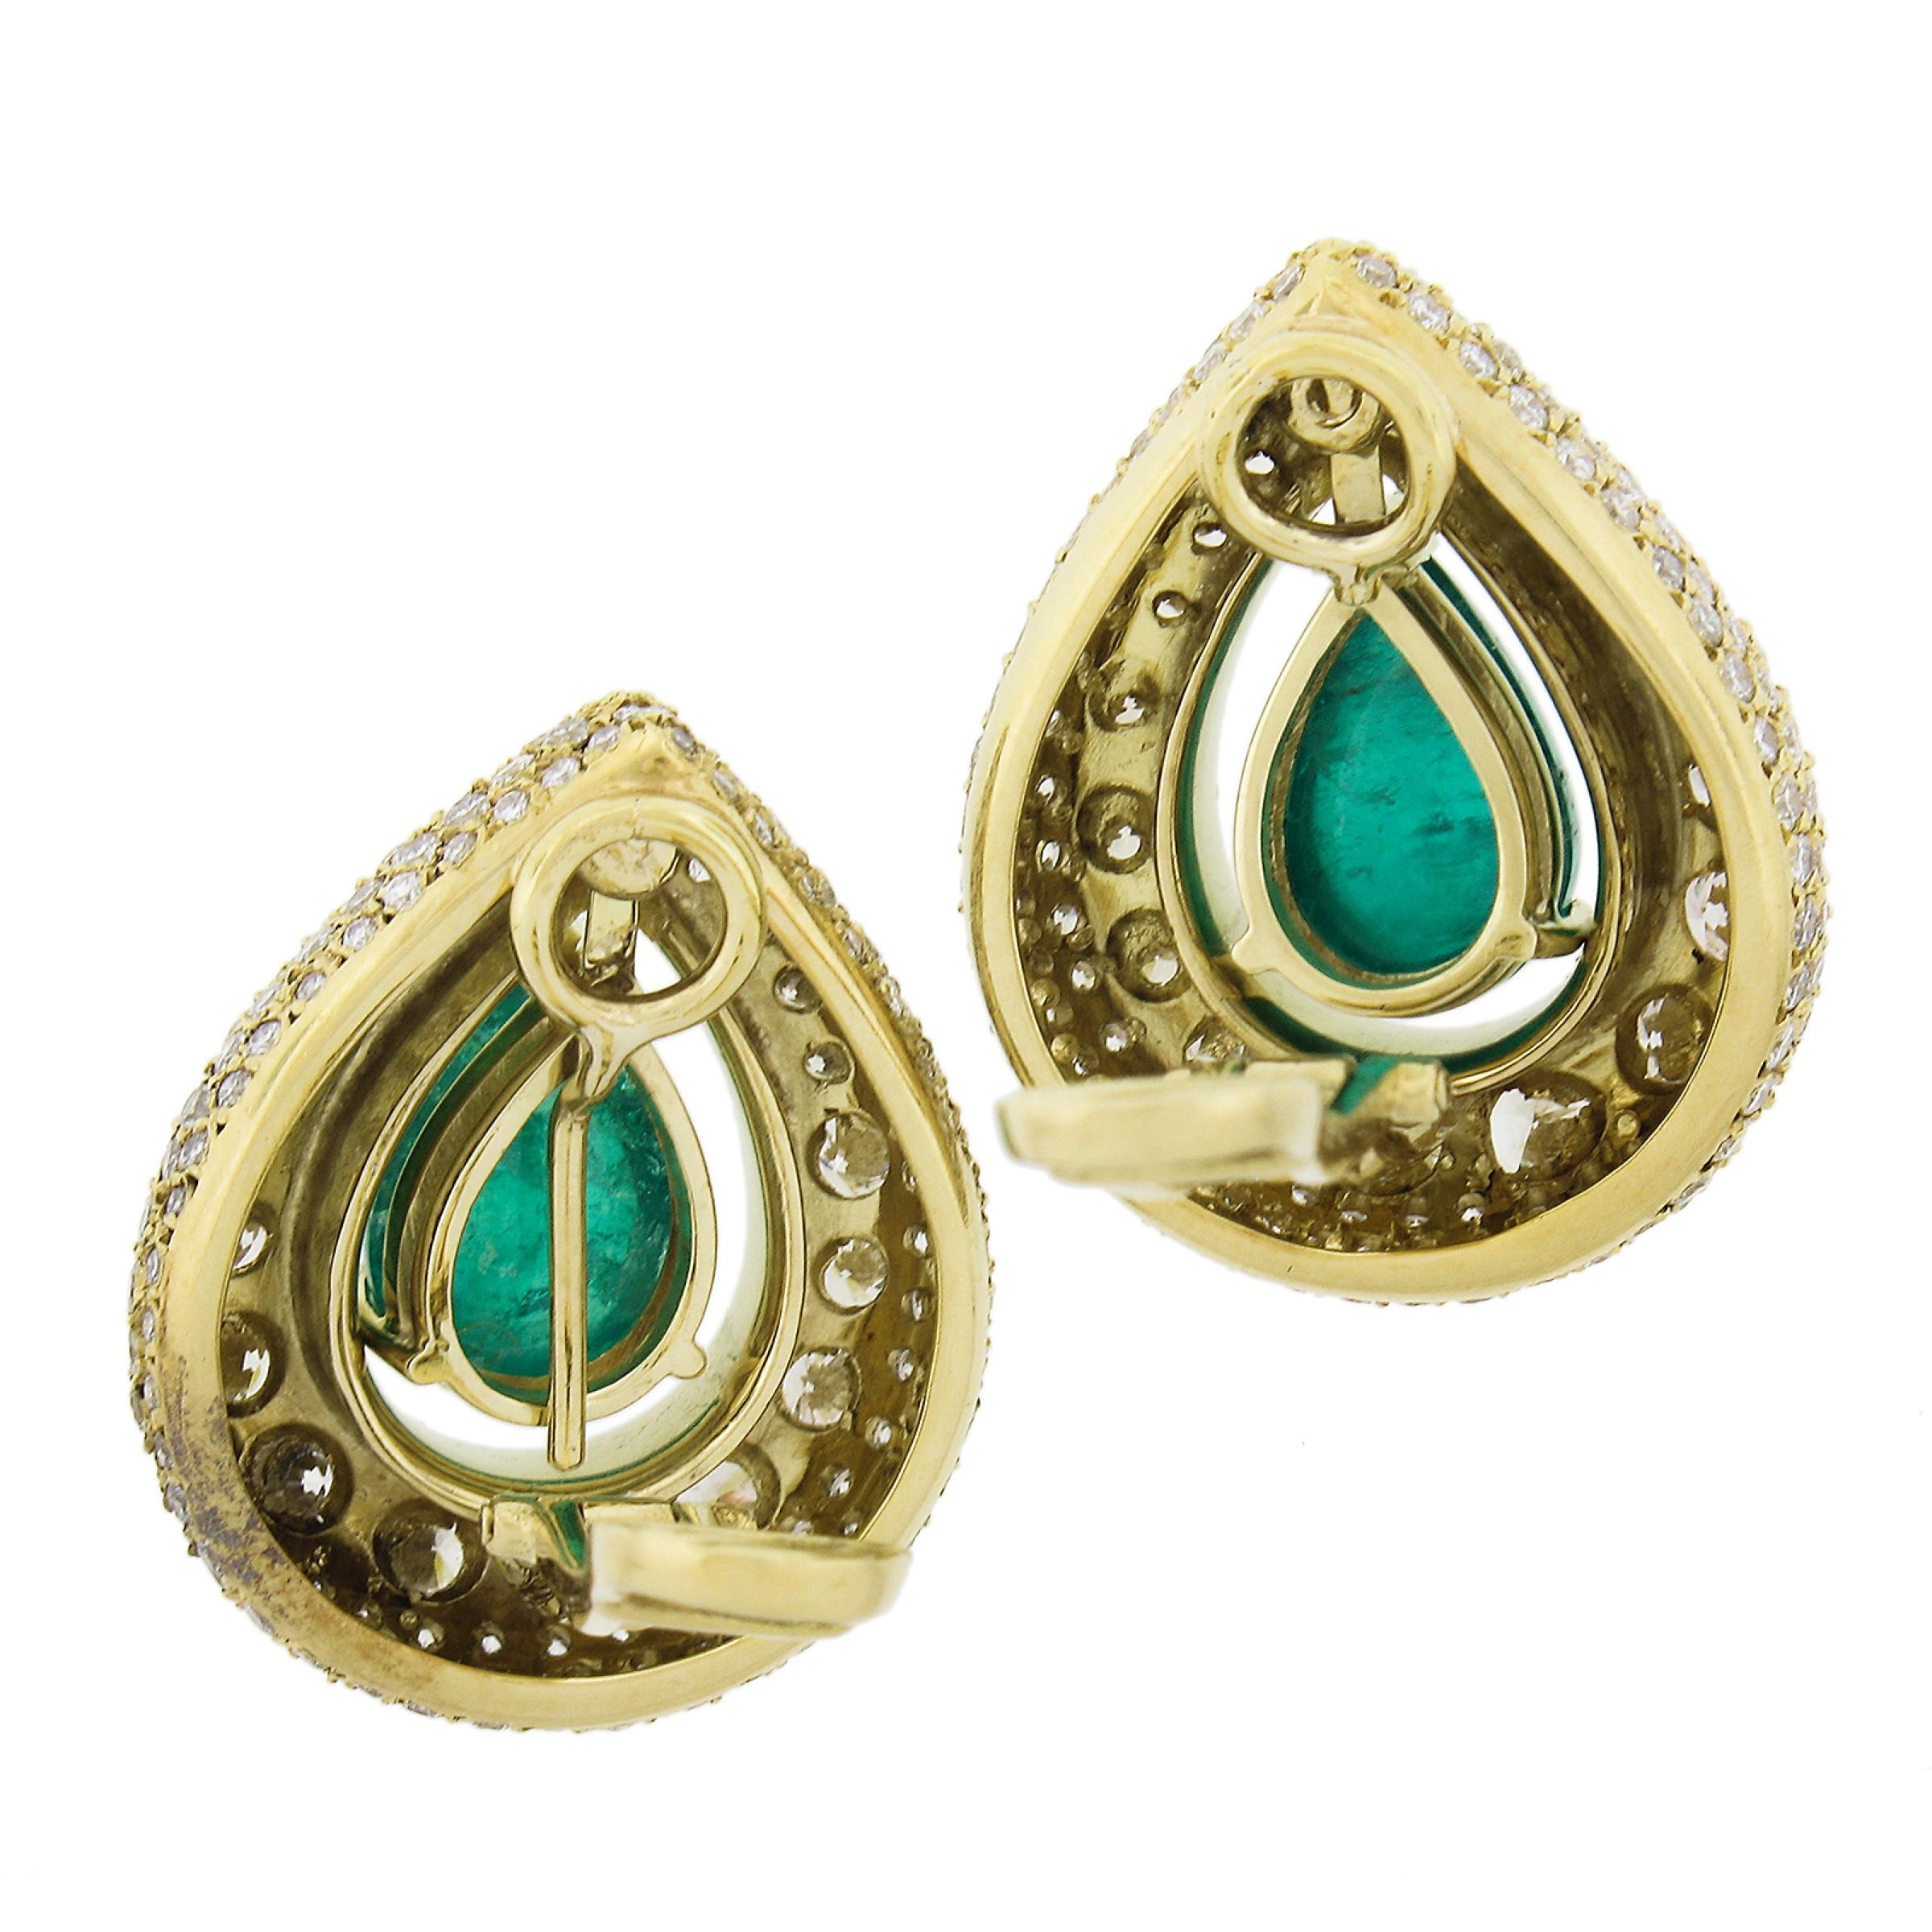 Vintage Large 18k Gold 15.0ctw GIA Pear Cabochon Emerald & Diamond Earrings 1